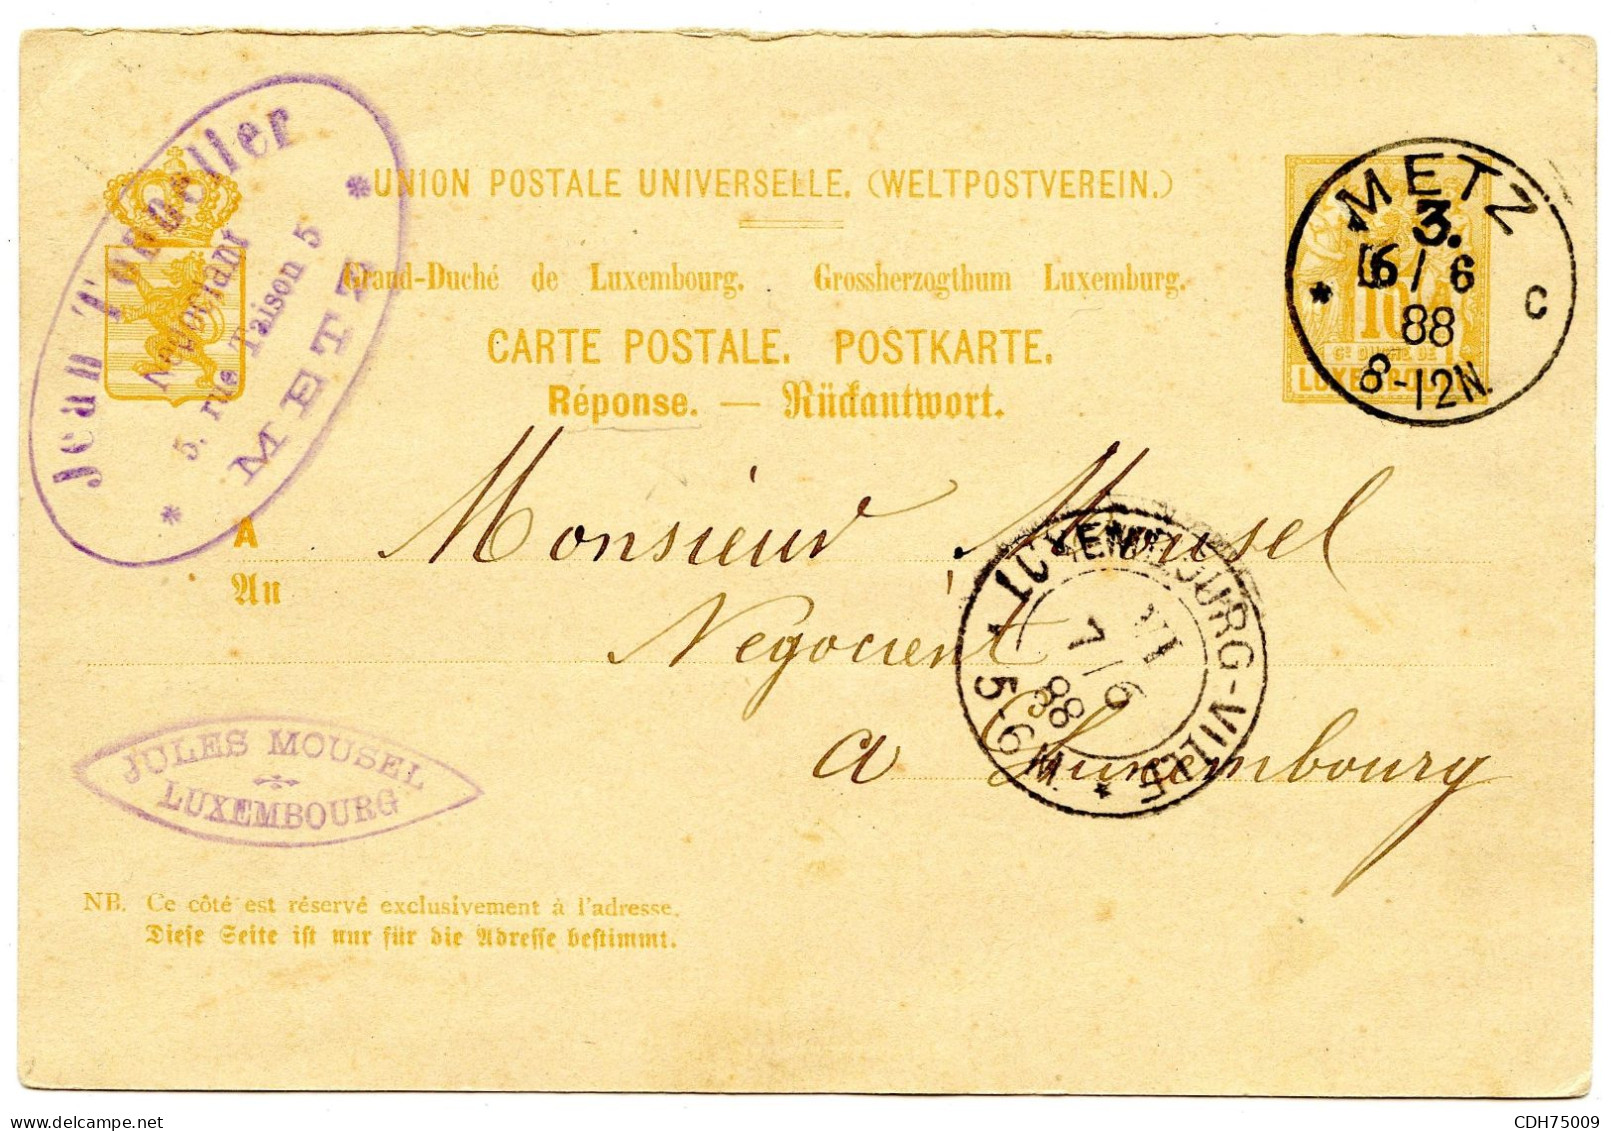 LUXEMBOURG - ENTIER CARTE POSTALE REPONSE 10C ARMOIRIES DE METZ POUR LUXEMBOURG, 1888 - 1859-1880 Coat Of Arms